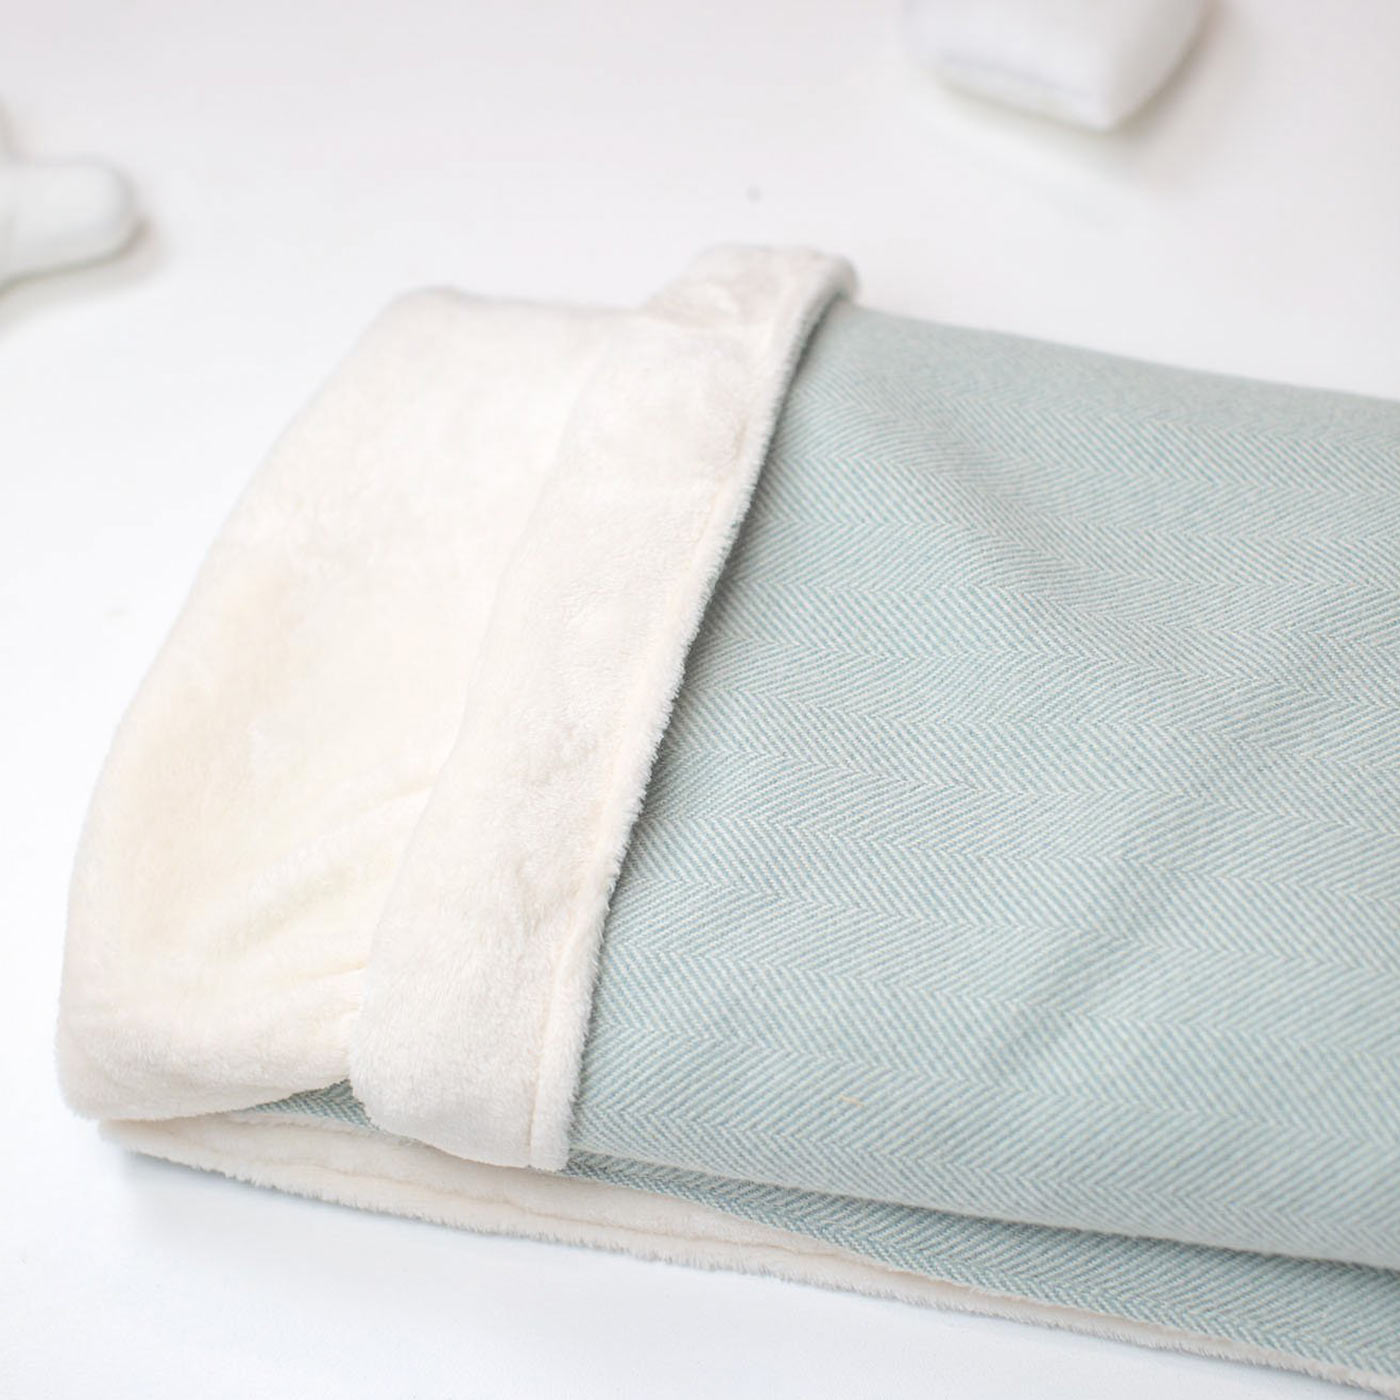 [color:duck Egg Herringbone] Super Soft Sherpa & Teddy Fleece Lining, Our Luxury Cat & Kitten Blanket In Stunning Duck Egg Herringbone The Perfect Cat Bed Accessory! Available To Personalize at Lords & Labradors US